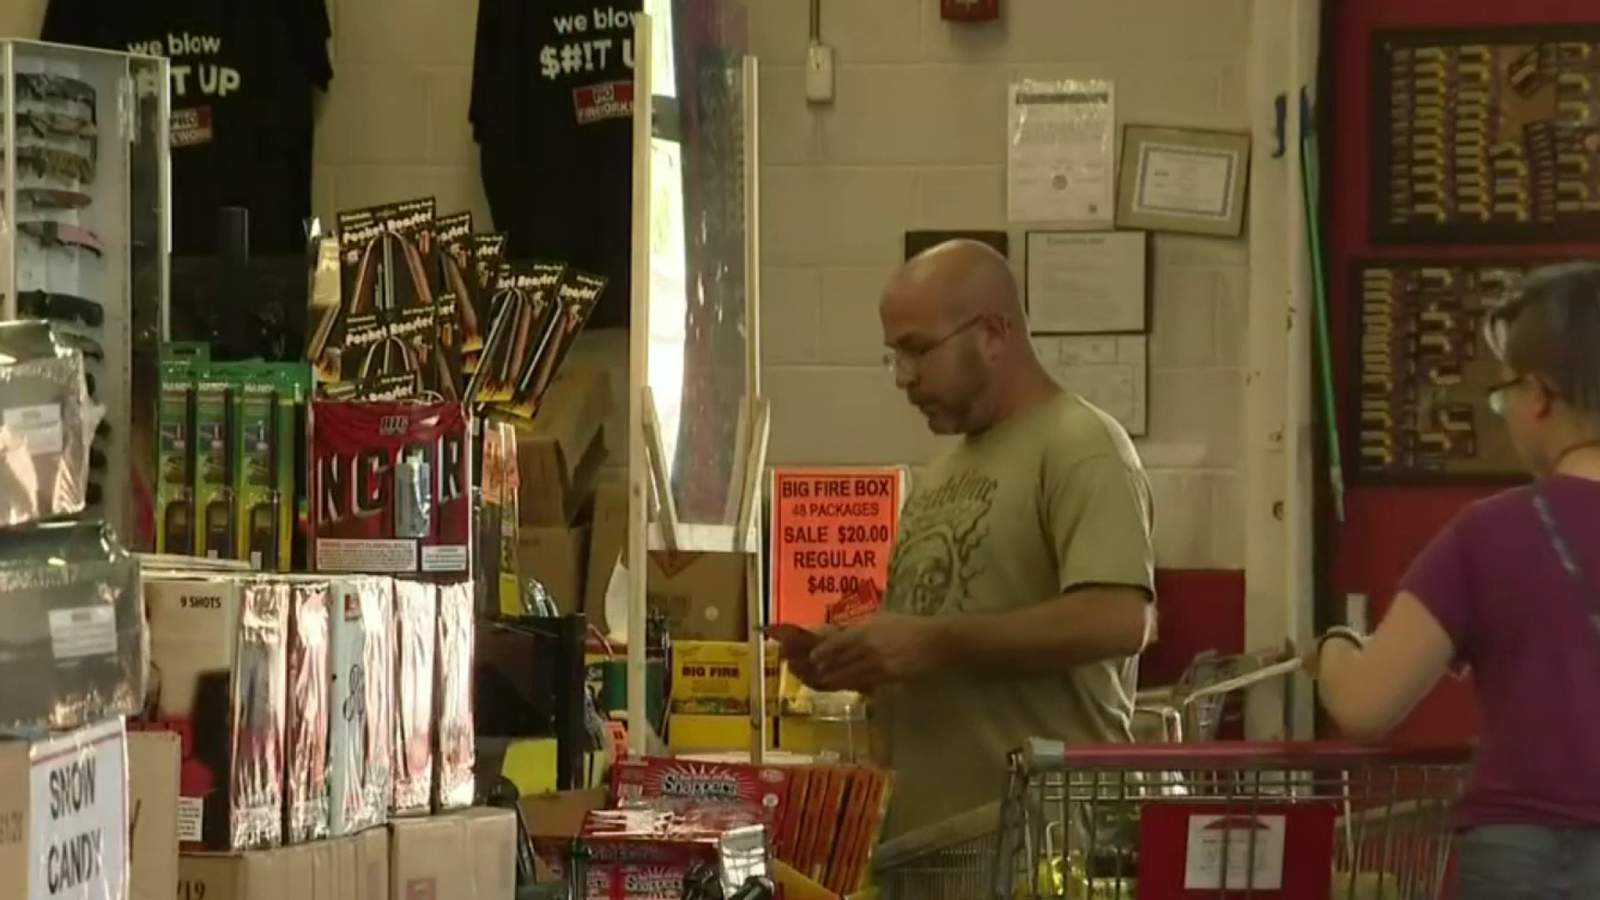 With public shows canceled, fireworks stores seeing uptick in sales